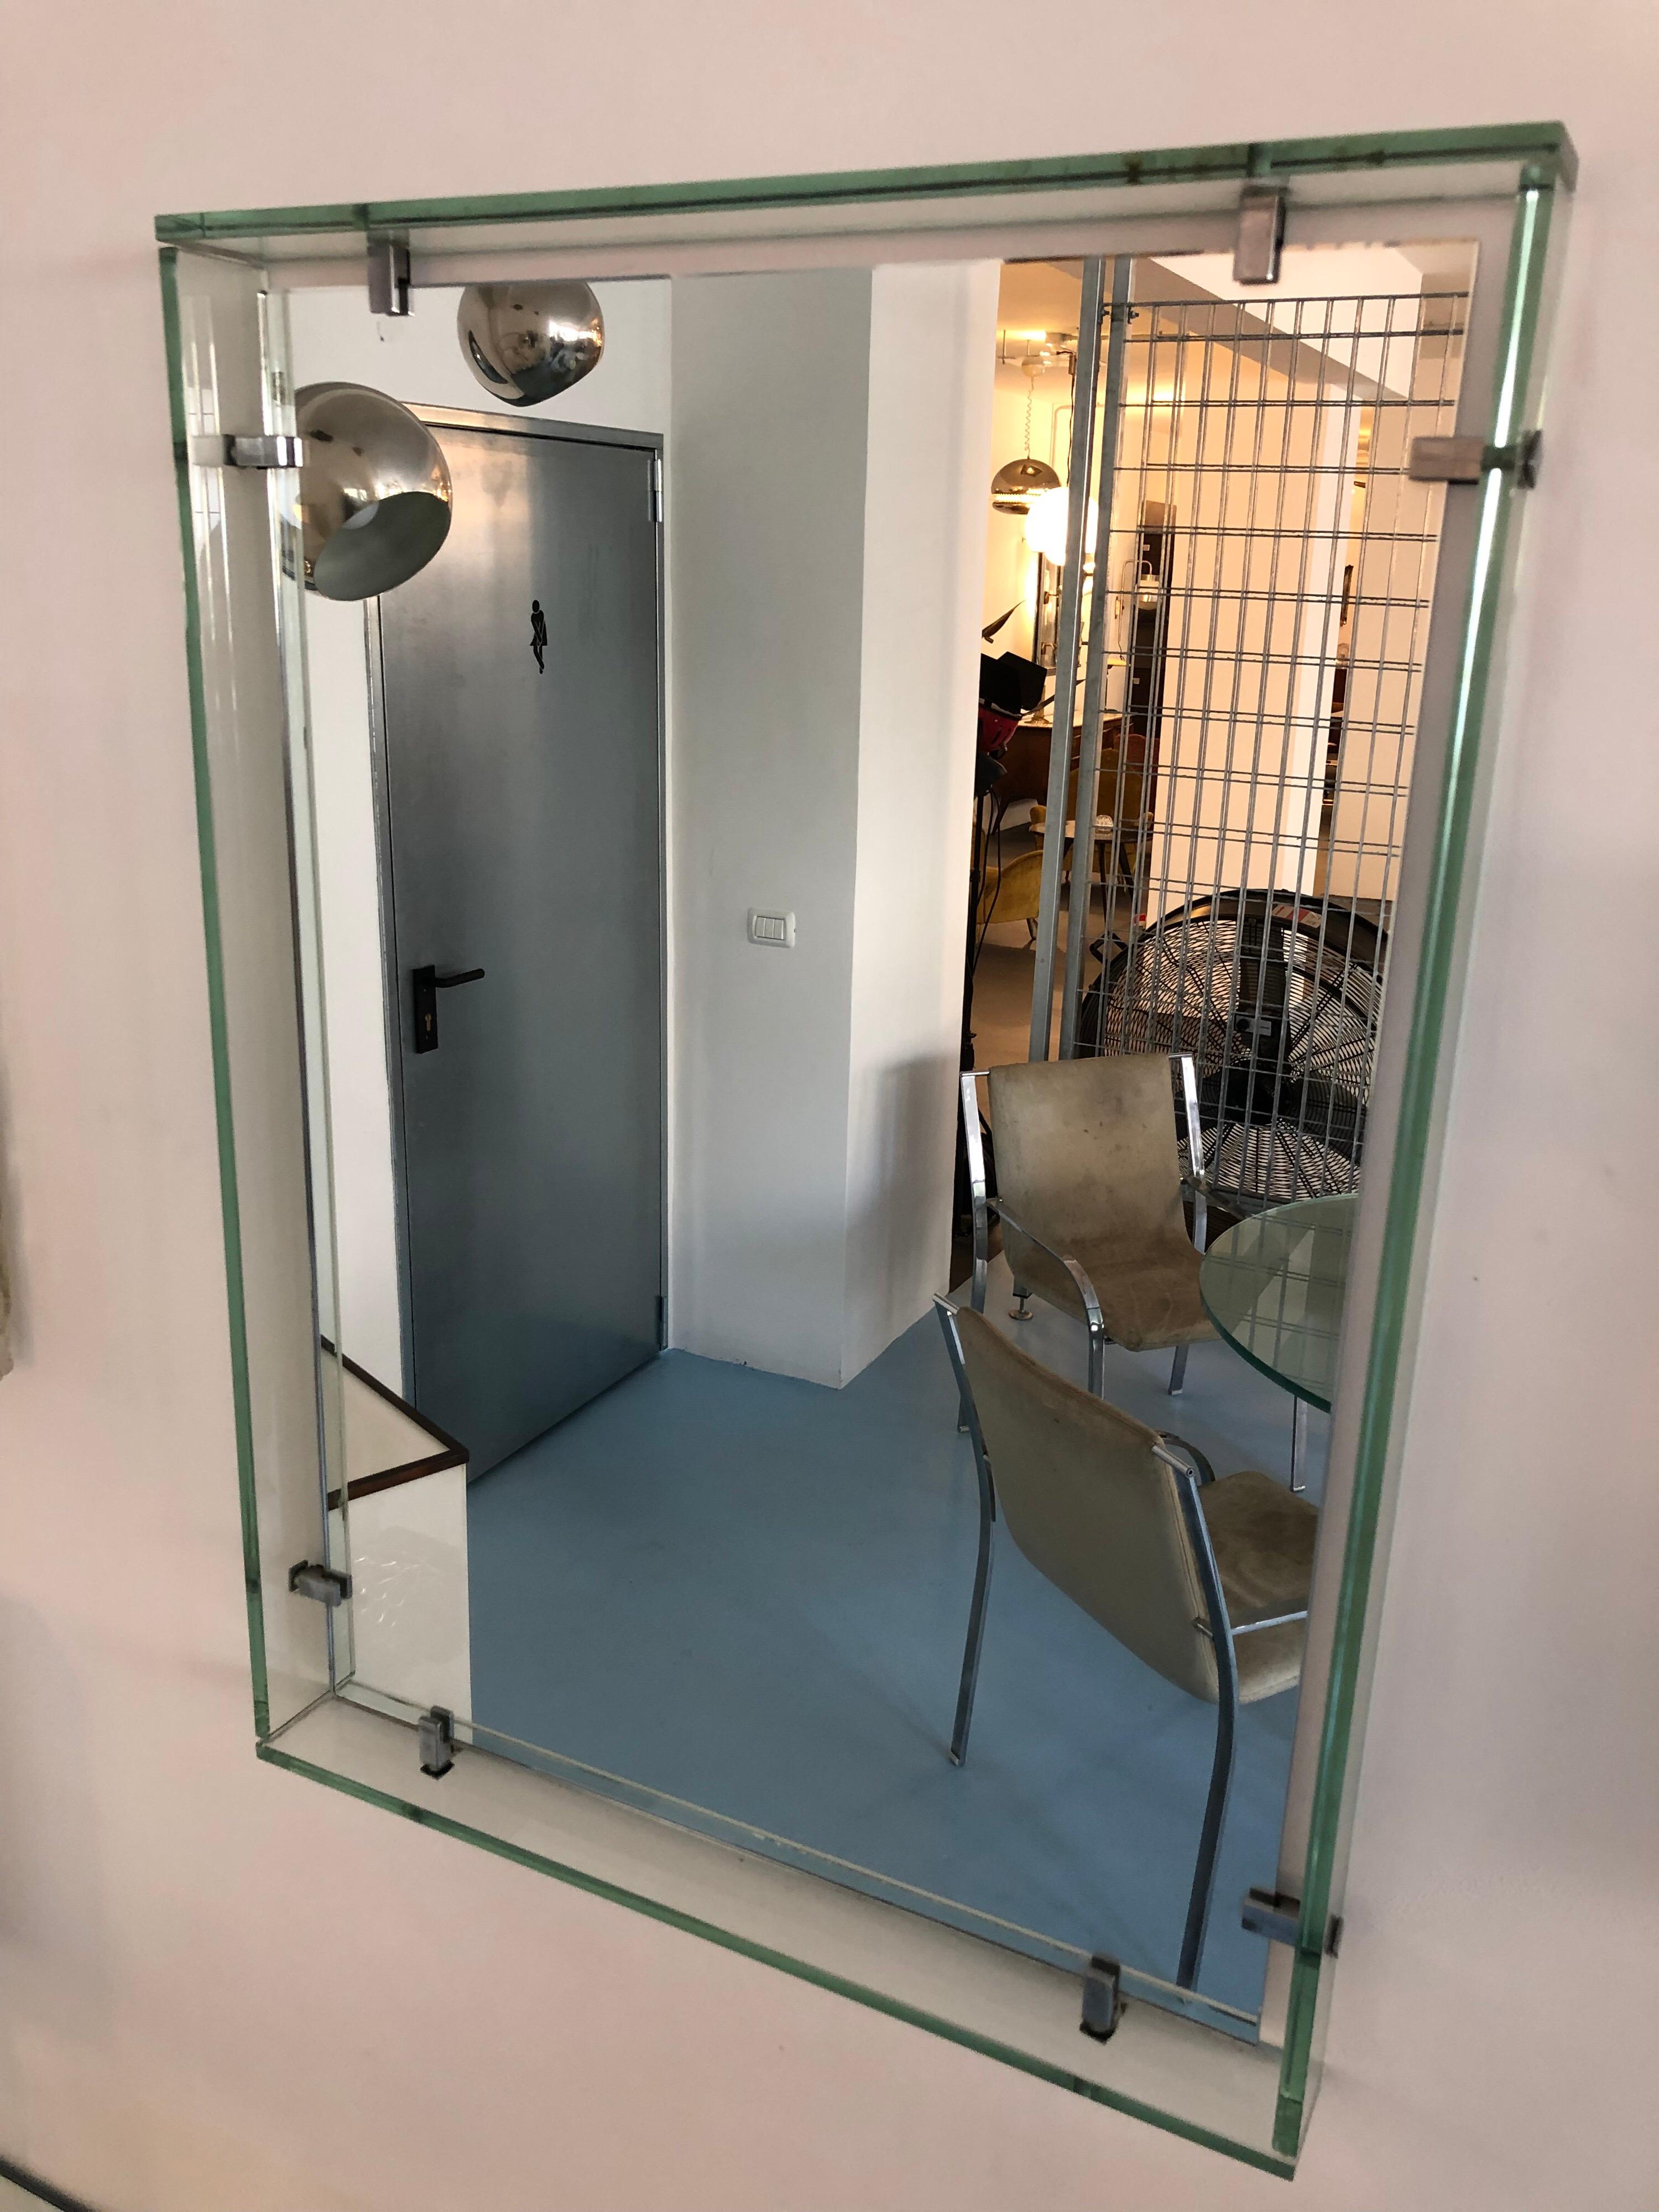 This mirror was produced in Italy by Fontana Arte in the 1961. It is made from thick clear glass and mirror. Very good vintage conditions with no cracks or chips.